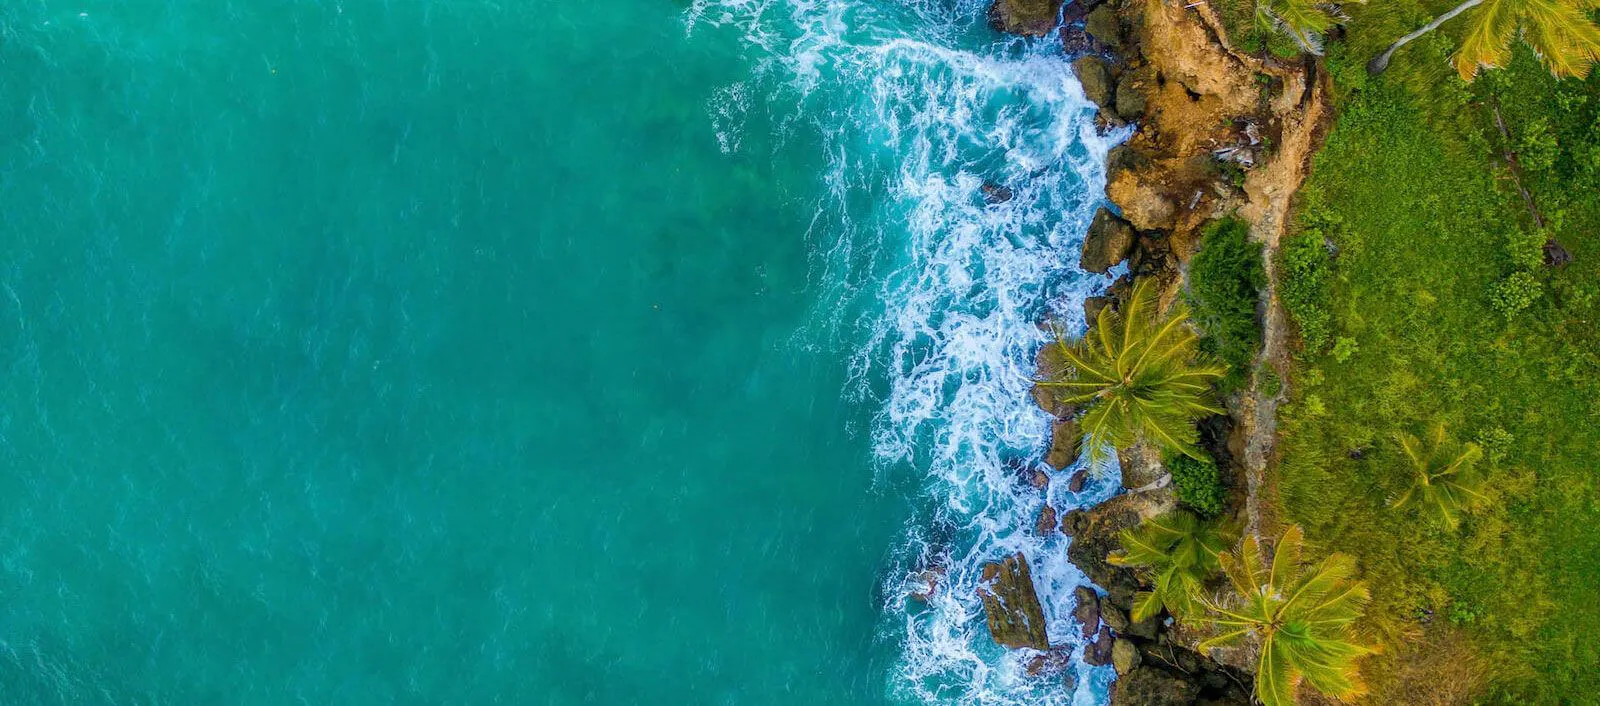 Overhead view of Jamaican coastline with rocks, palm trees, and breaking surf